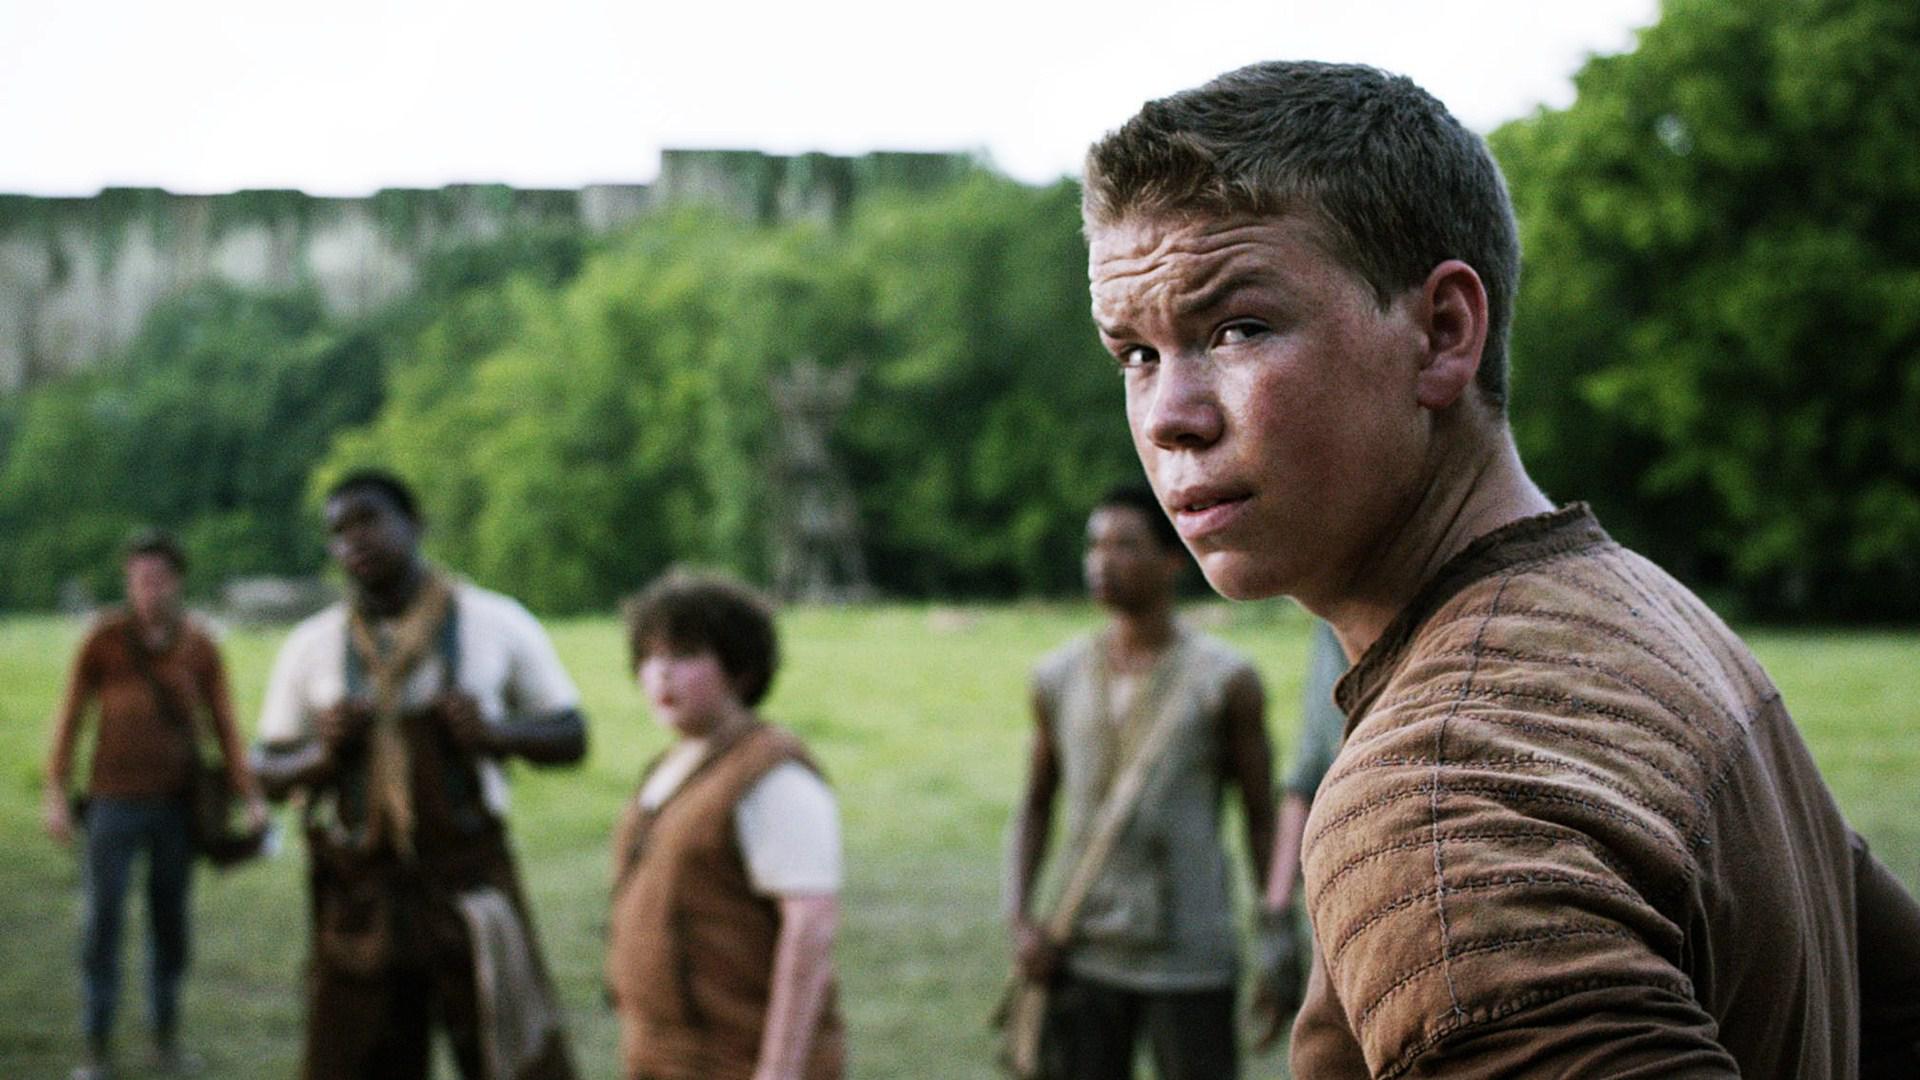 Free download Will Poulter Wallpaper Full HD Picture [1920x1080] for your Desktop, Mobile & Tablet. Explore Will Poulter Wallpaper. Elf Wallpaper Will Ferrell, Wallpaper Will Not Come Off, Will Smith Wallpaper